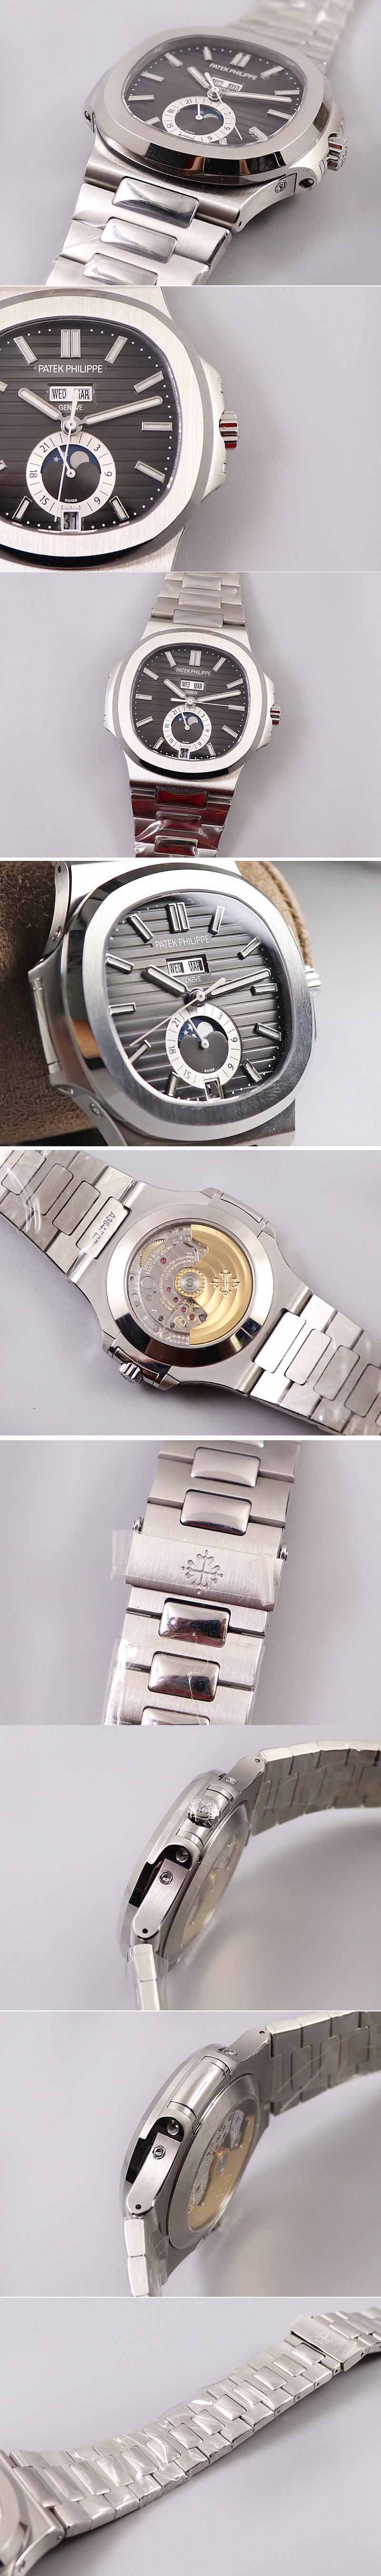 Replica Patek Philippe Nautilus 5726 Complicated SS GRF 1:1 Best Edition Black Textured Dial on SS Bracelet A324